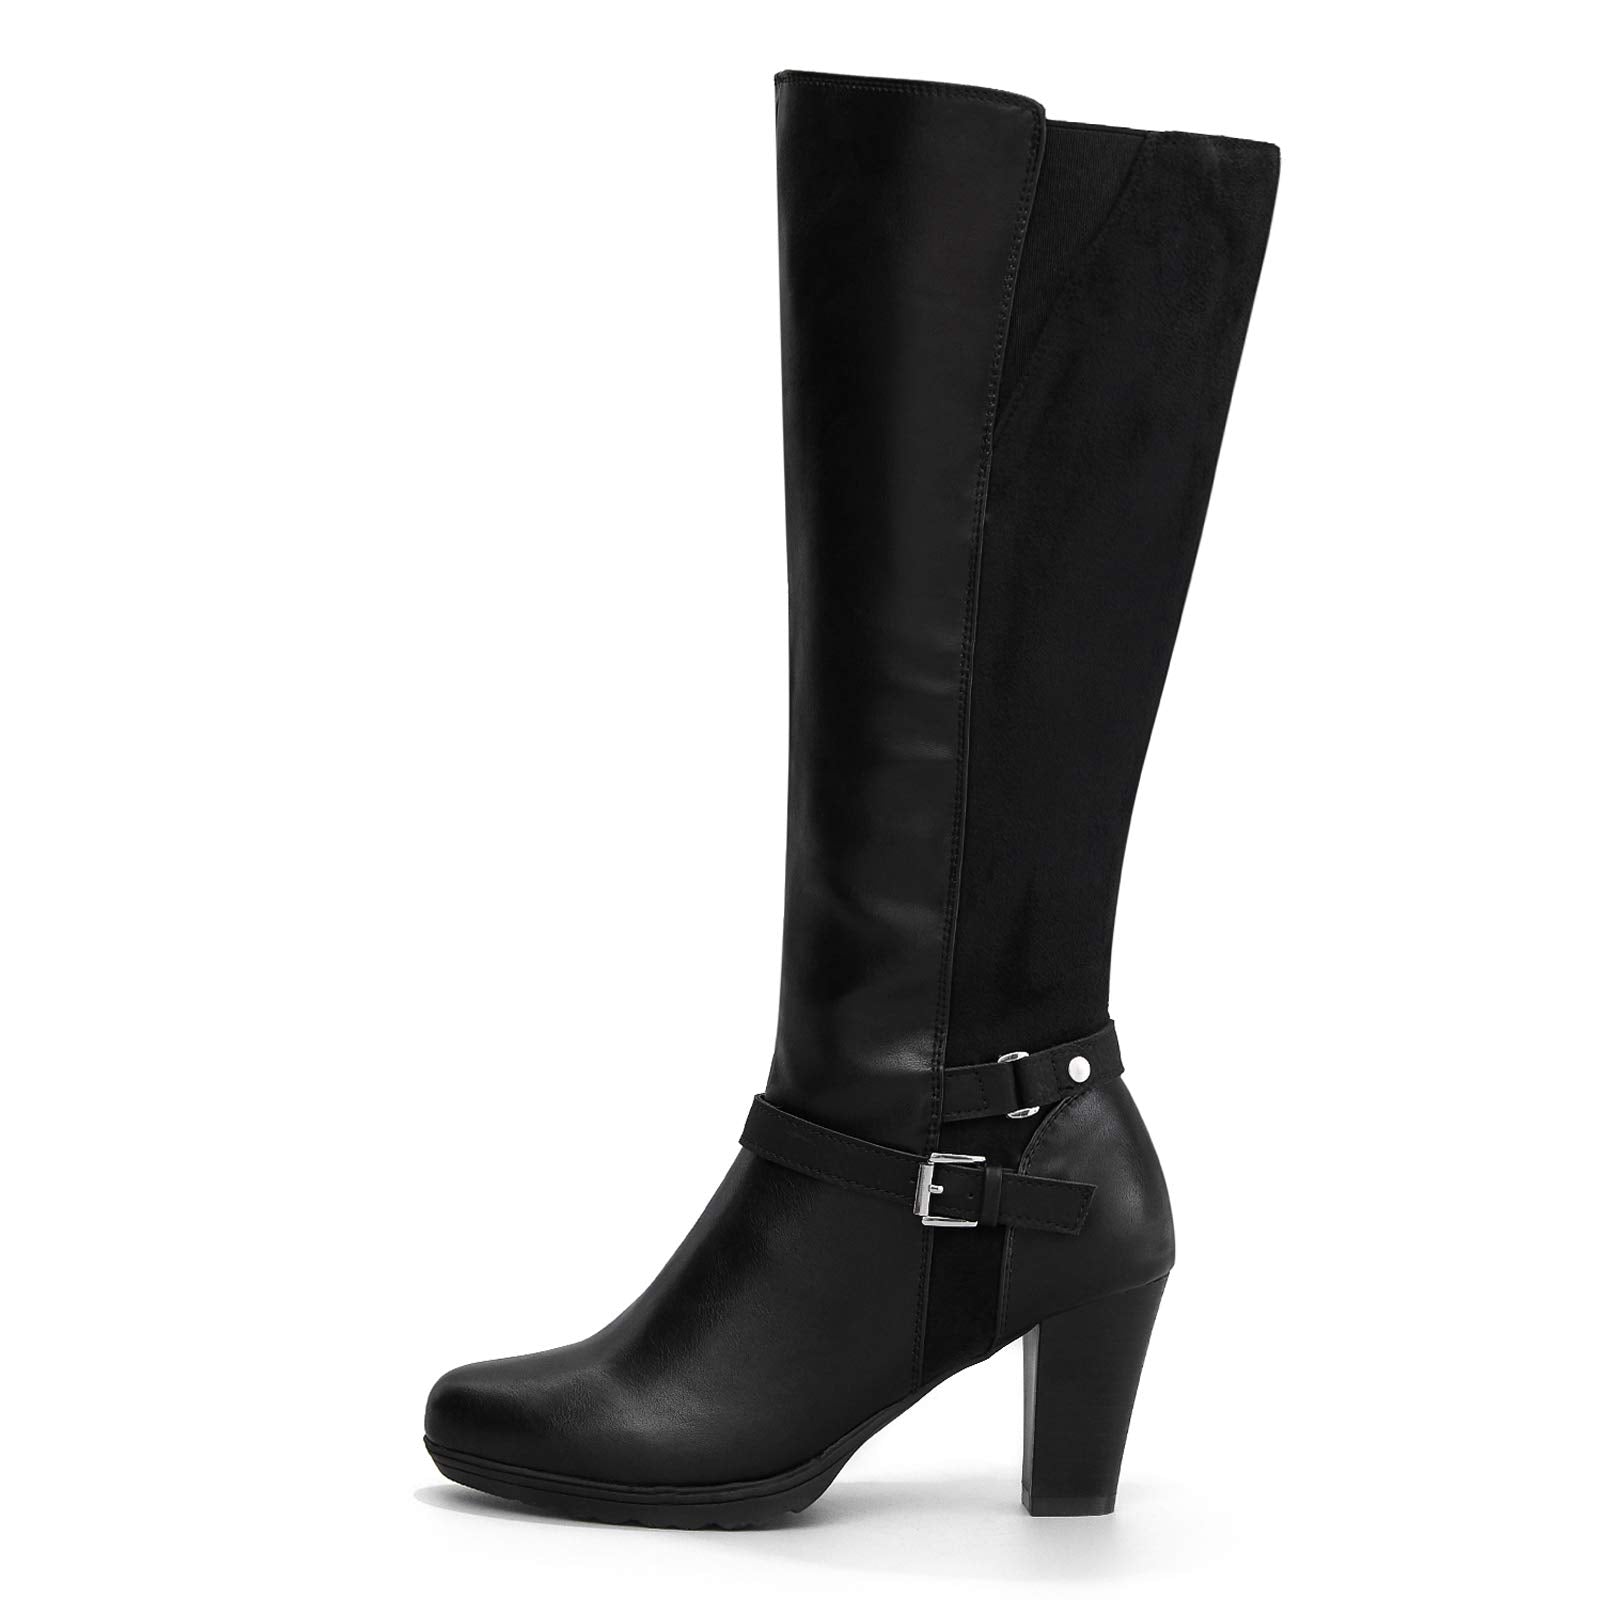 Black Knee High Suede Leather Boots